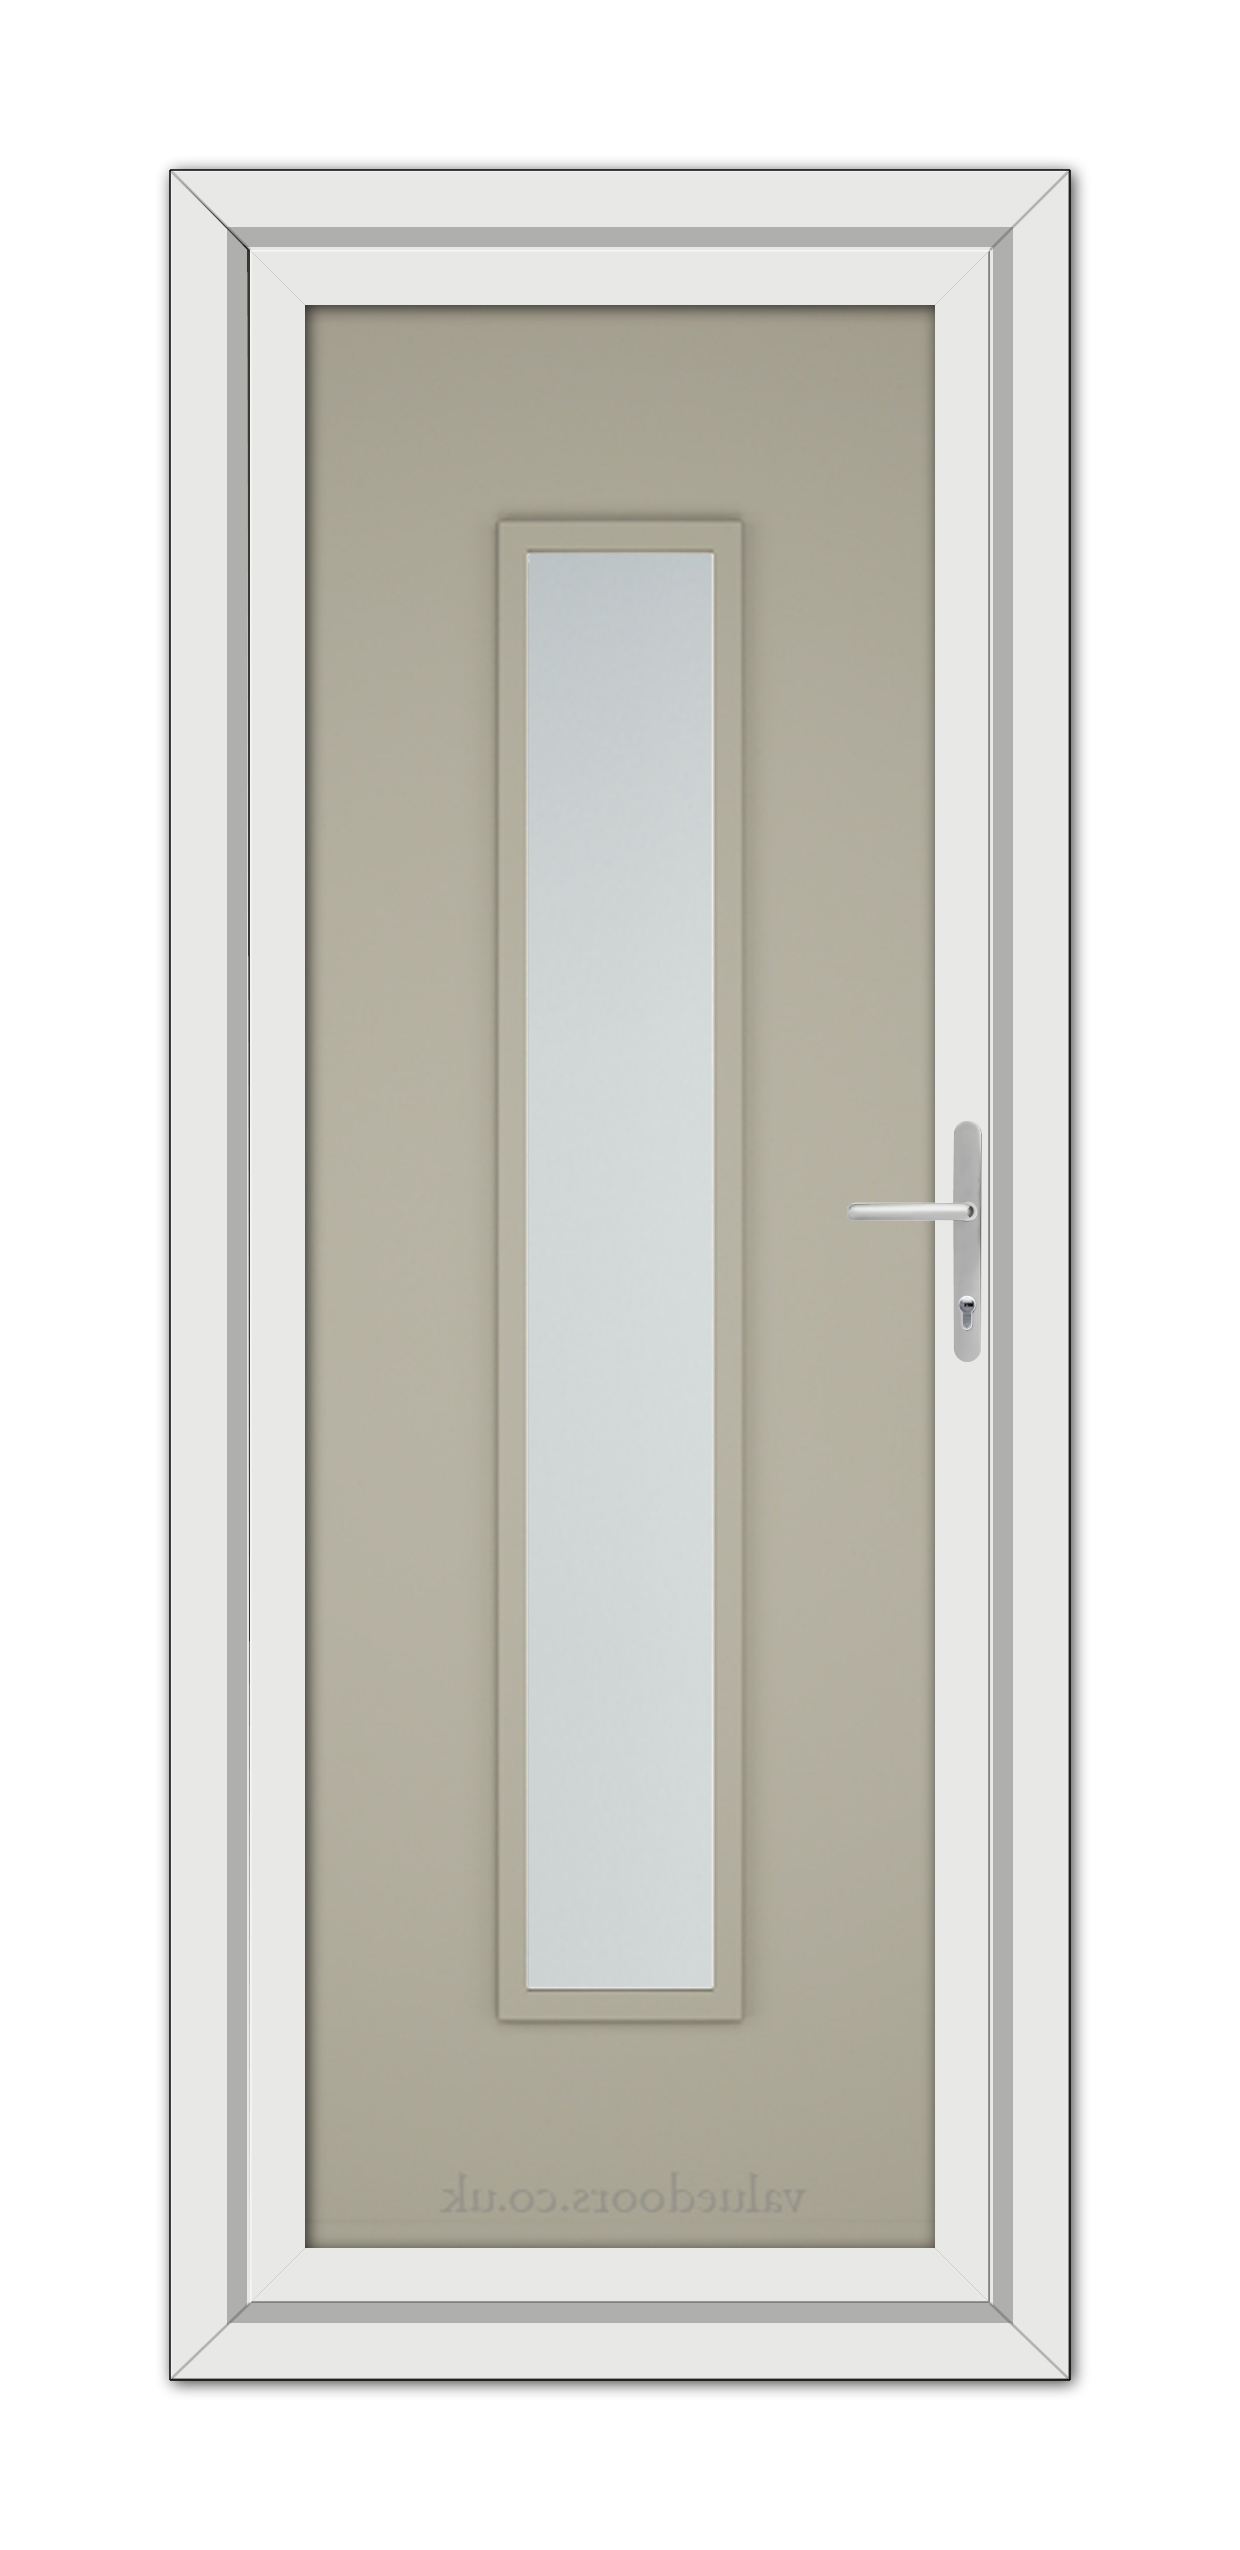 A Pebble Grey Modern 5101 uPVC door with a narrow vertical glass panel and a metallic handle, isolated on a white background.